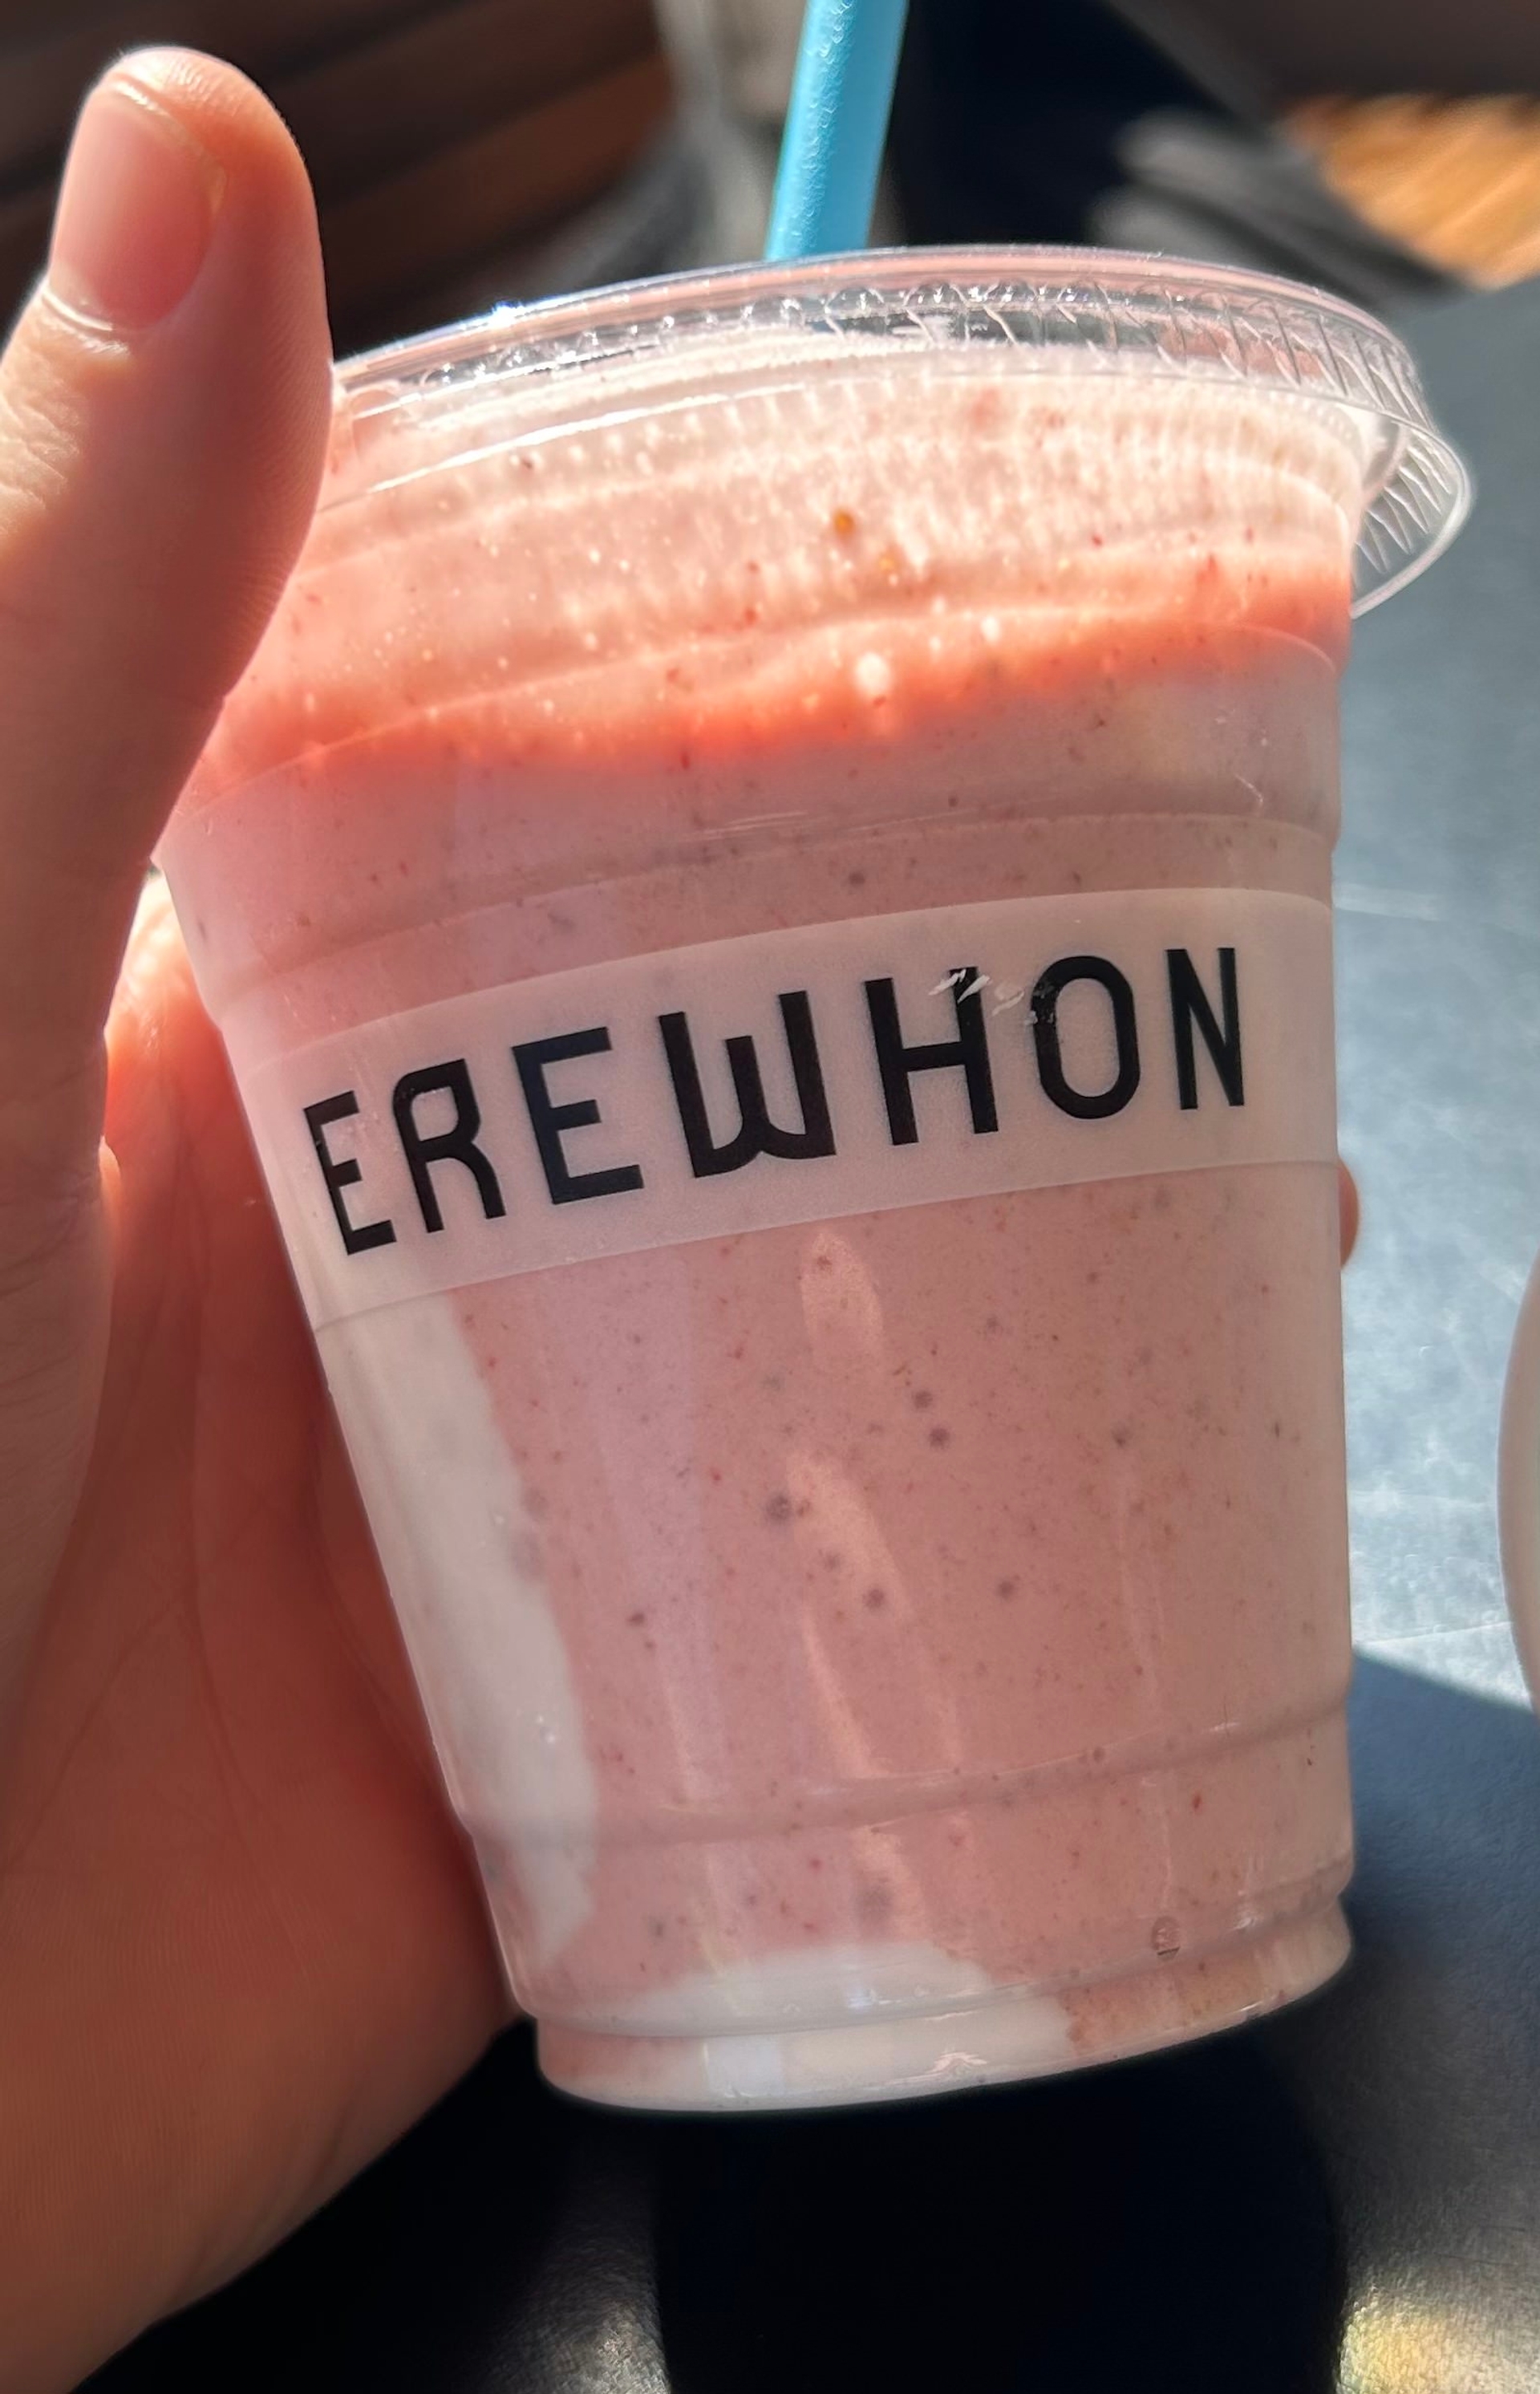 I ended up accidentally getting a different, non-Hailey Bieber strawberry smoothie at the Silver Lake Erewhon